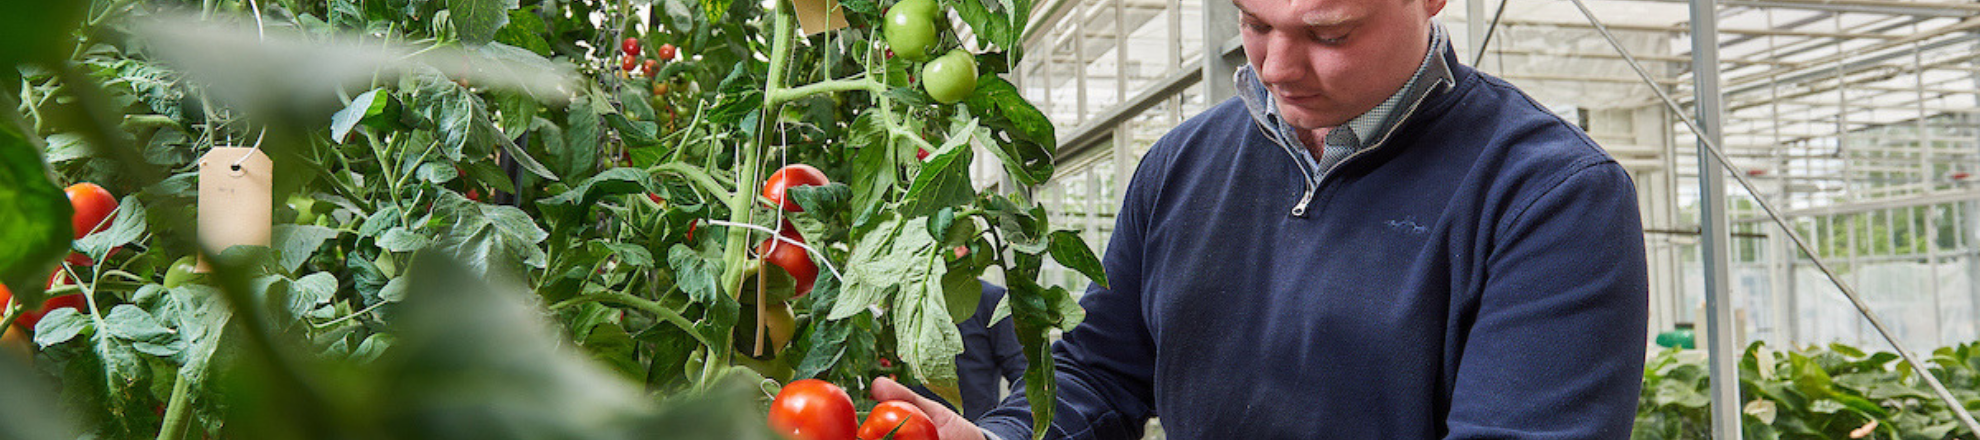 Arable farming student from Aeres University of Applied Sciences with tomatoes in greenhouse